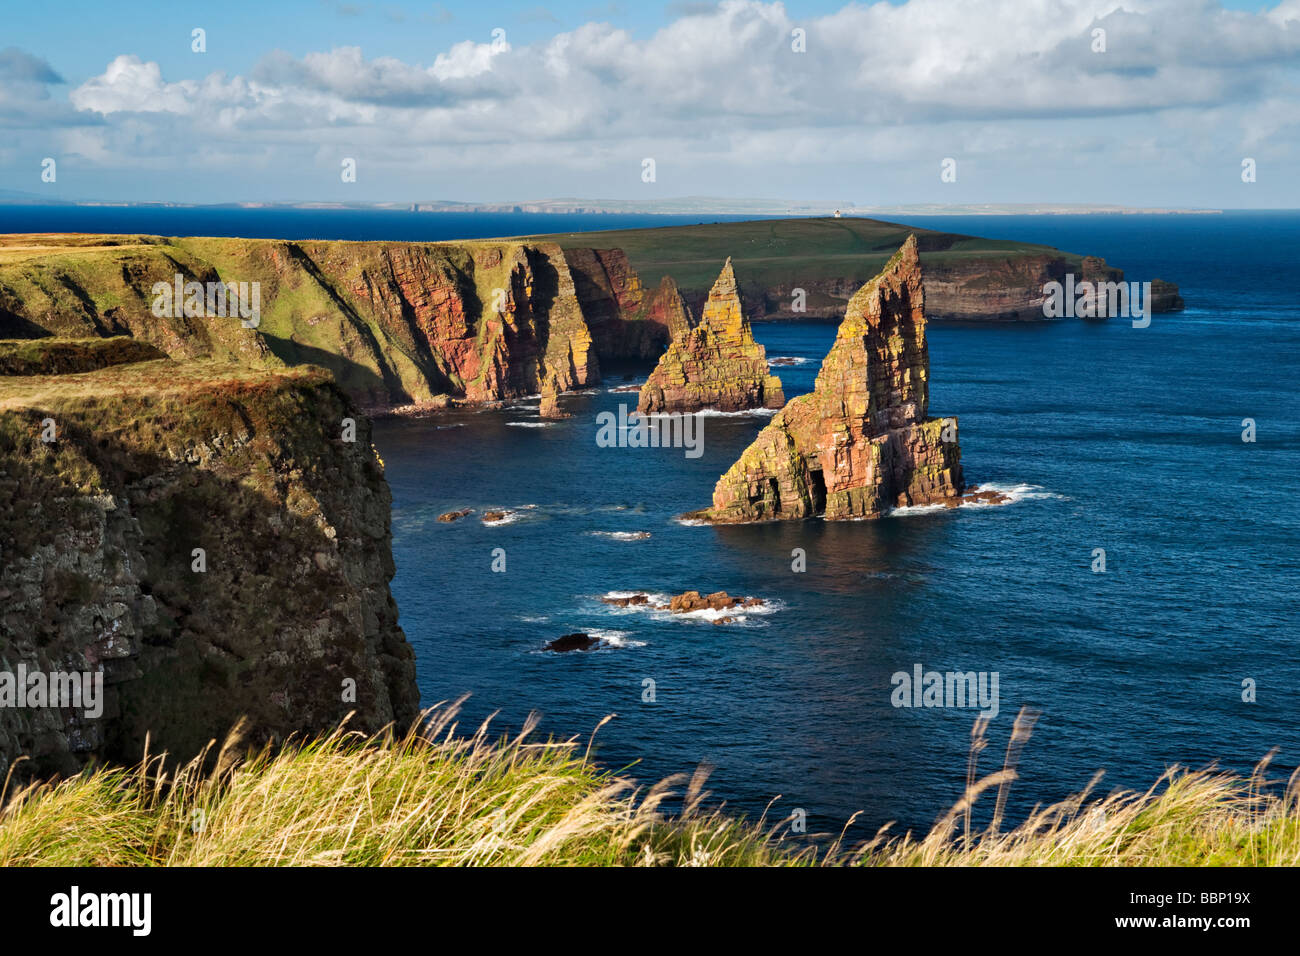 Duncansby stacks, near Duncansby head, John O'Groats, Scotland, showing the impressive cliffs and pillar like rock formations Stock Photo